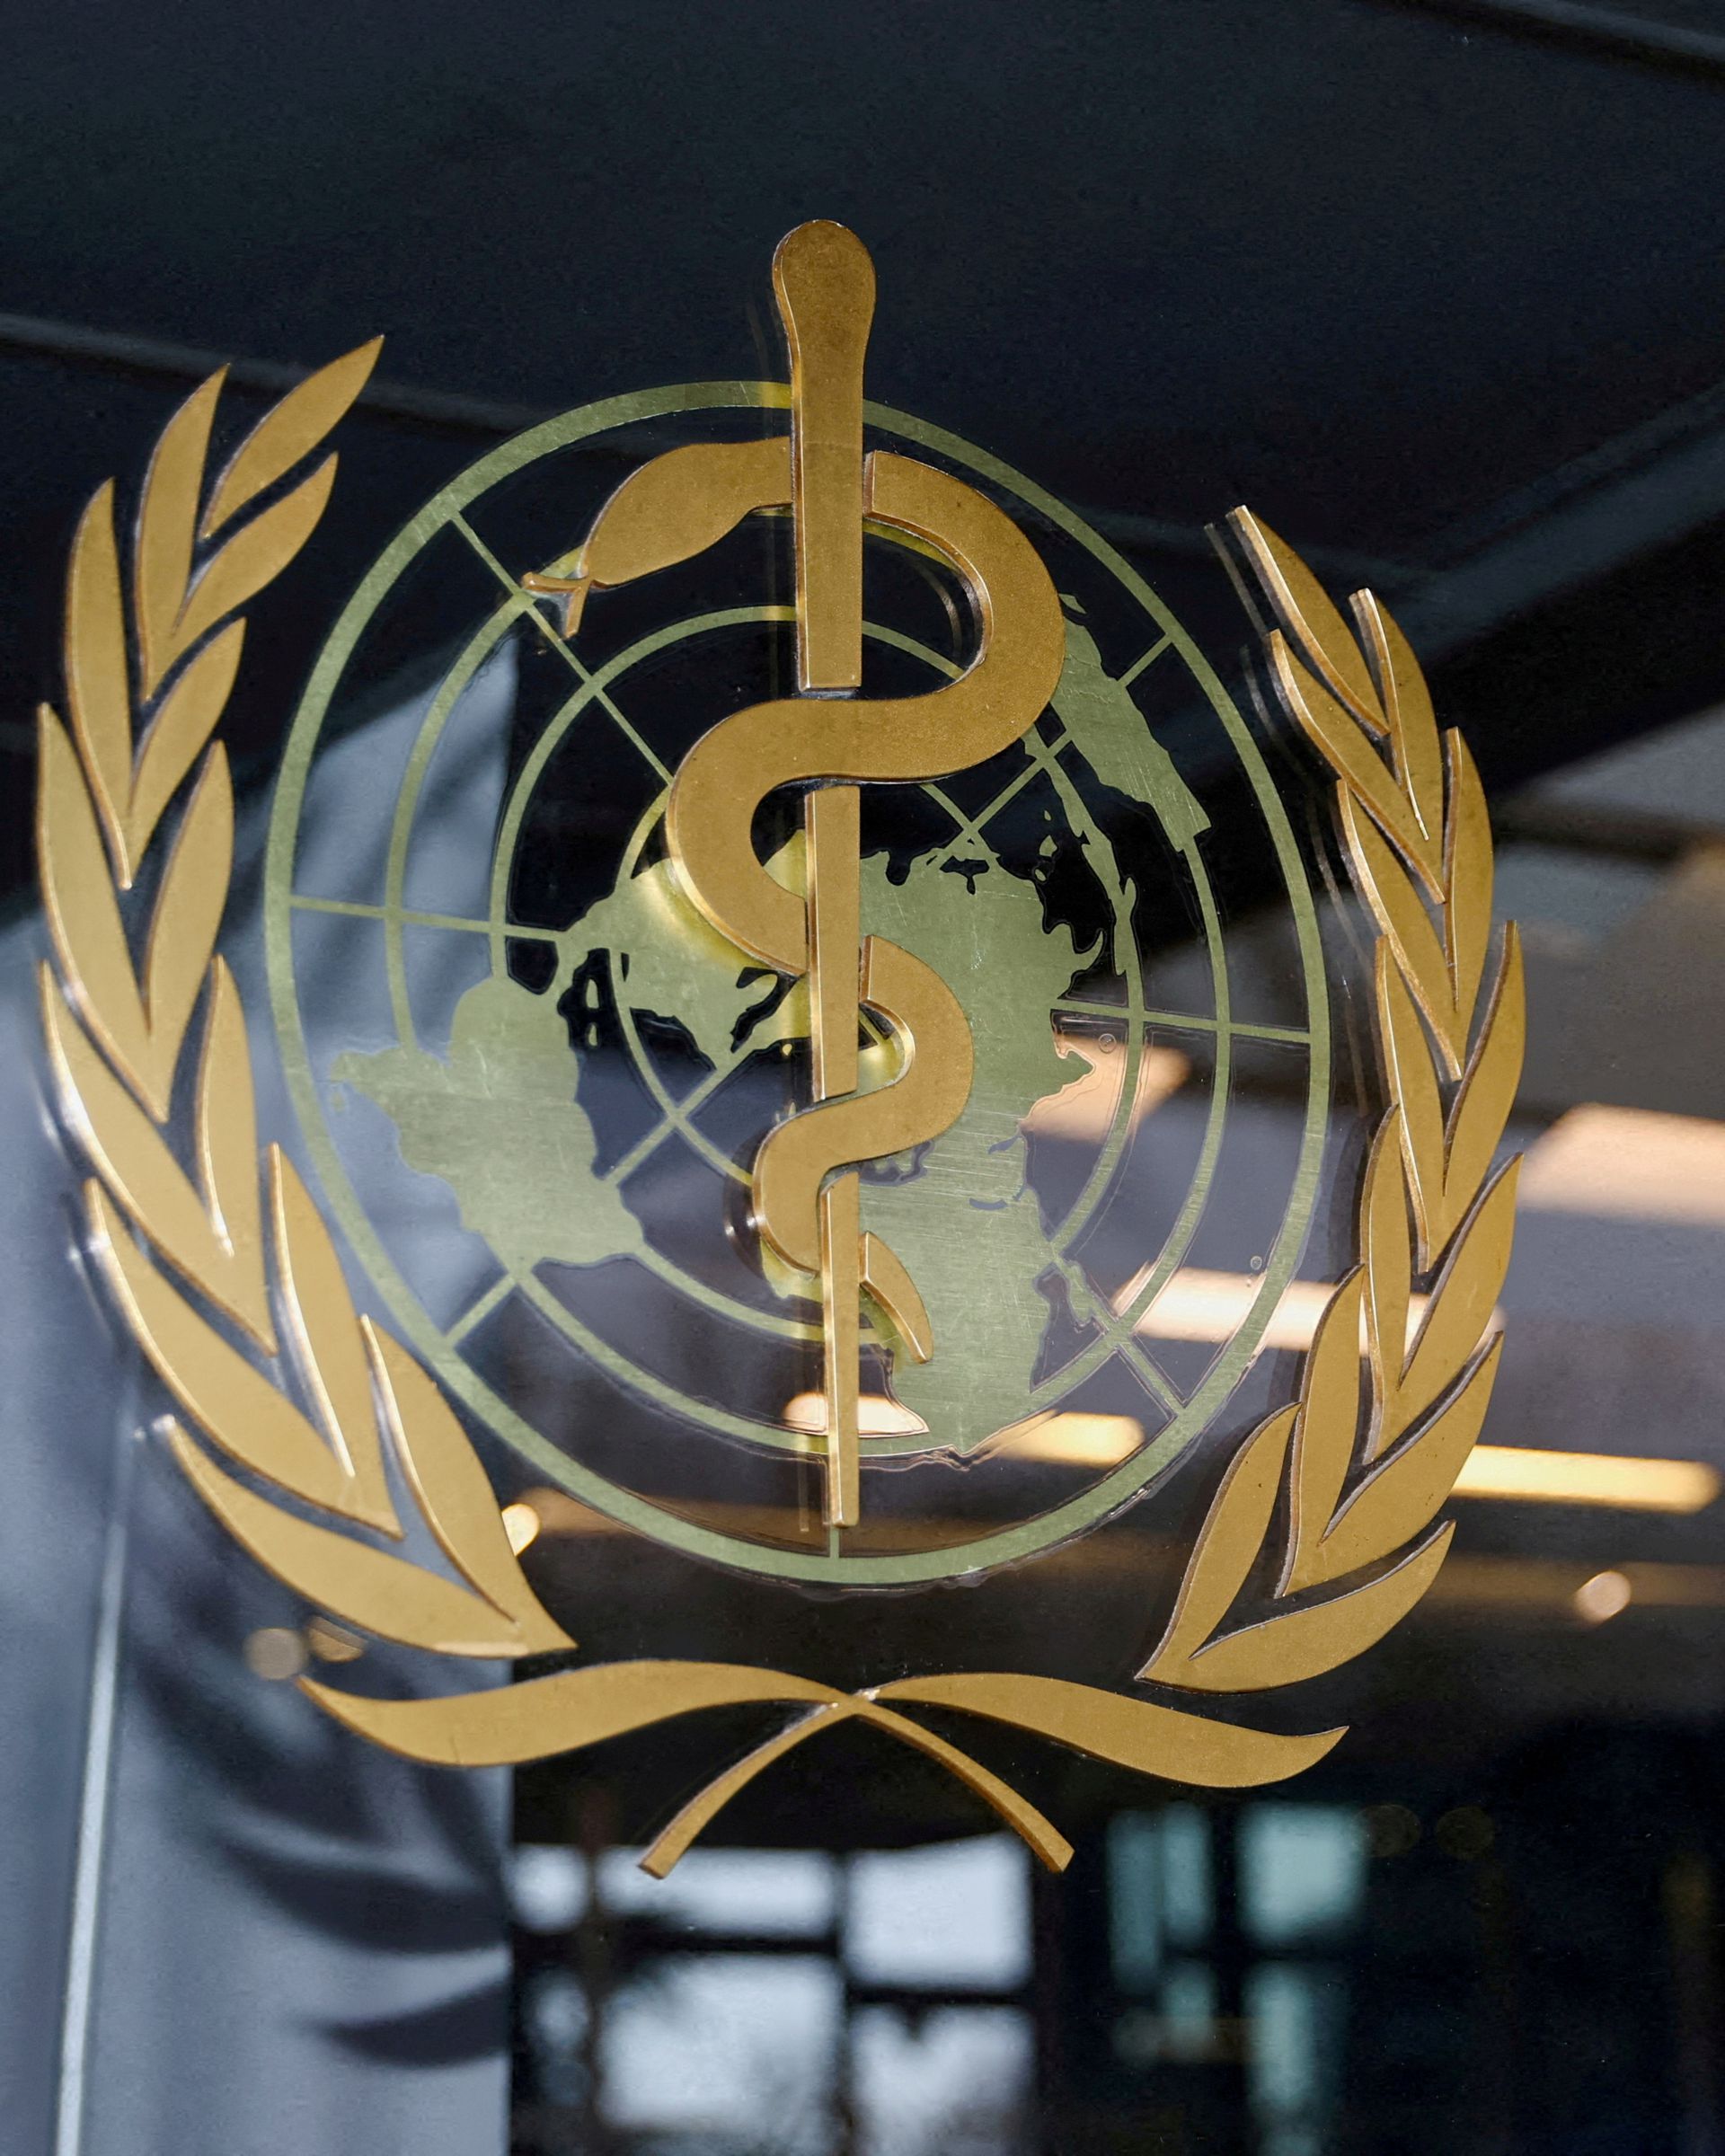 Explainer: How the World Health Organization might face future pandemics